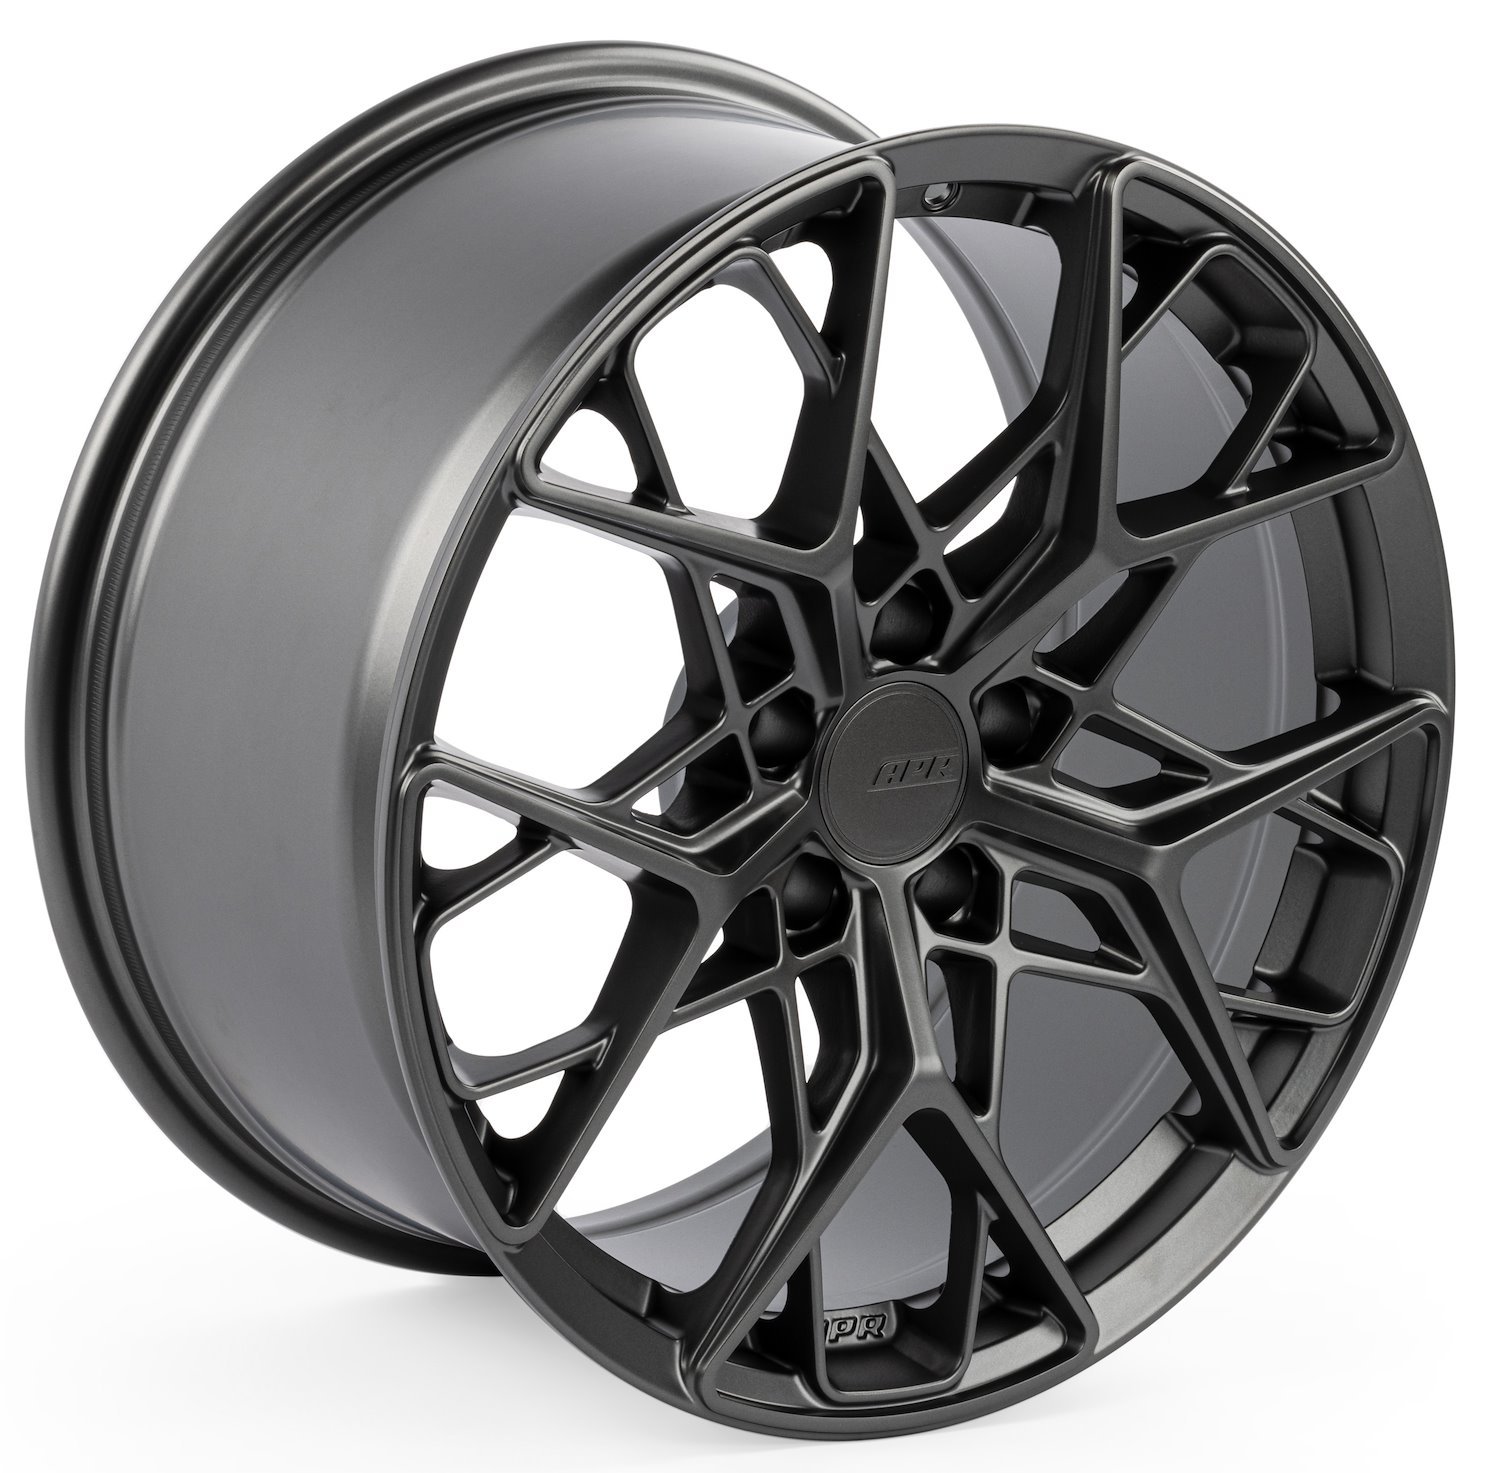 A02 Flow-Formed Wheel, Size: 18 x 8.50" [Anthracite]